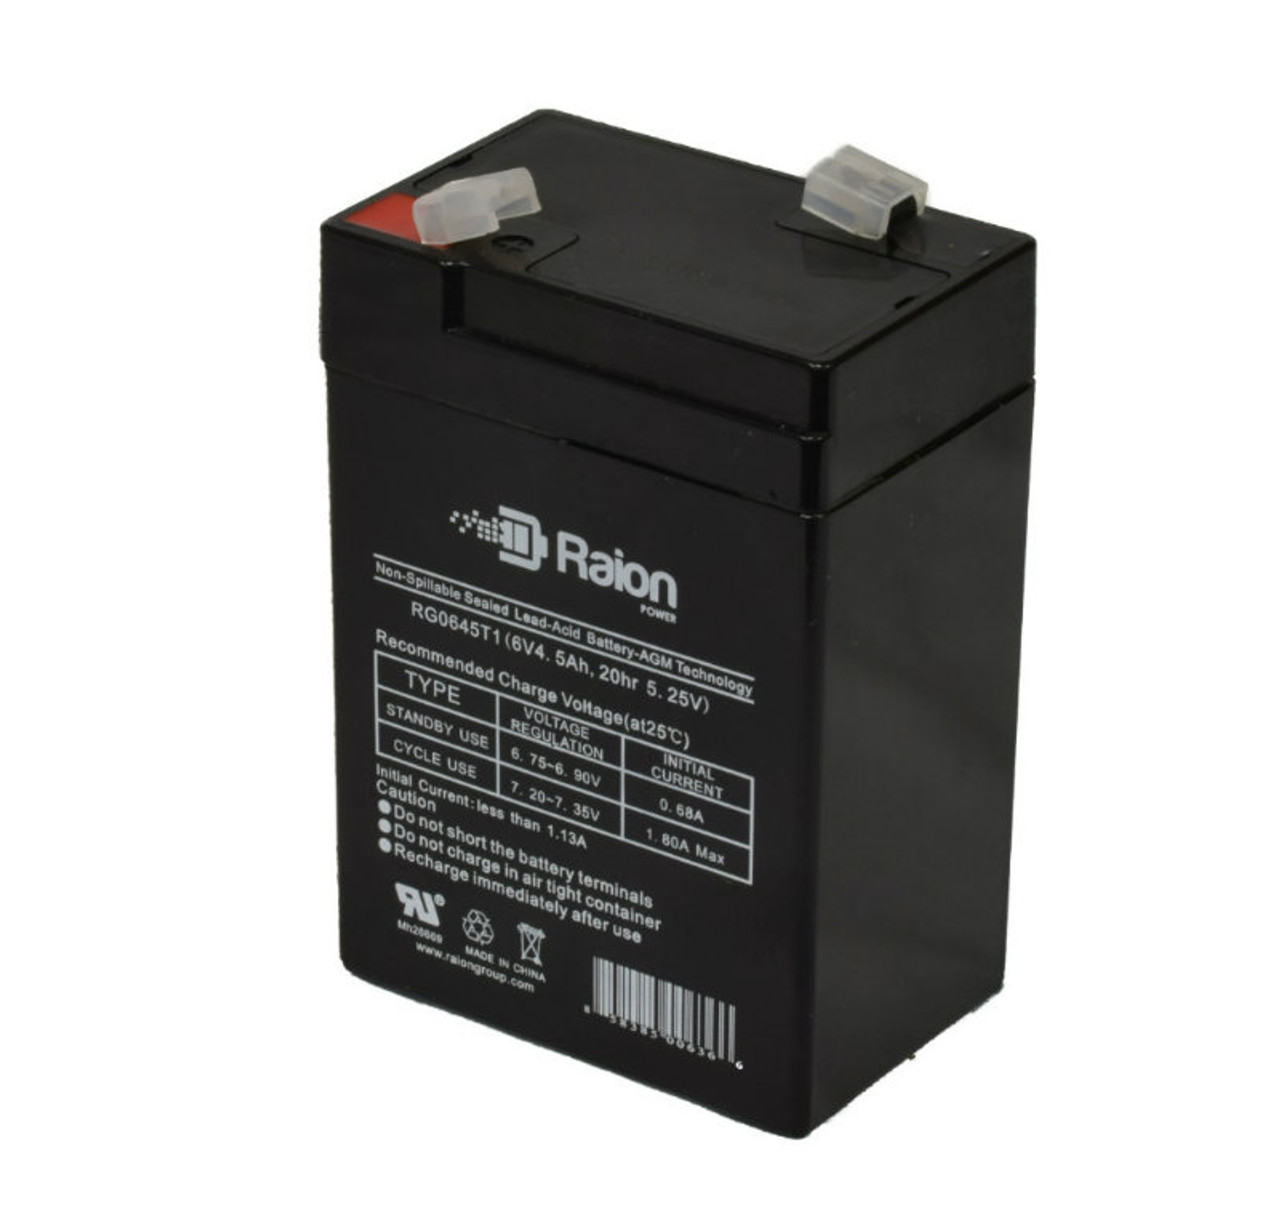 Raion Power RG0645T1 6V 4.5Ah Replacement Battery Cartridge for GP GB4.5-6H